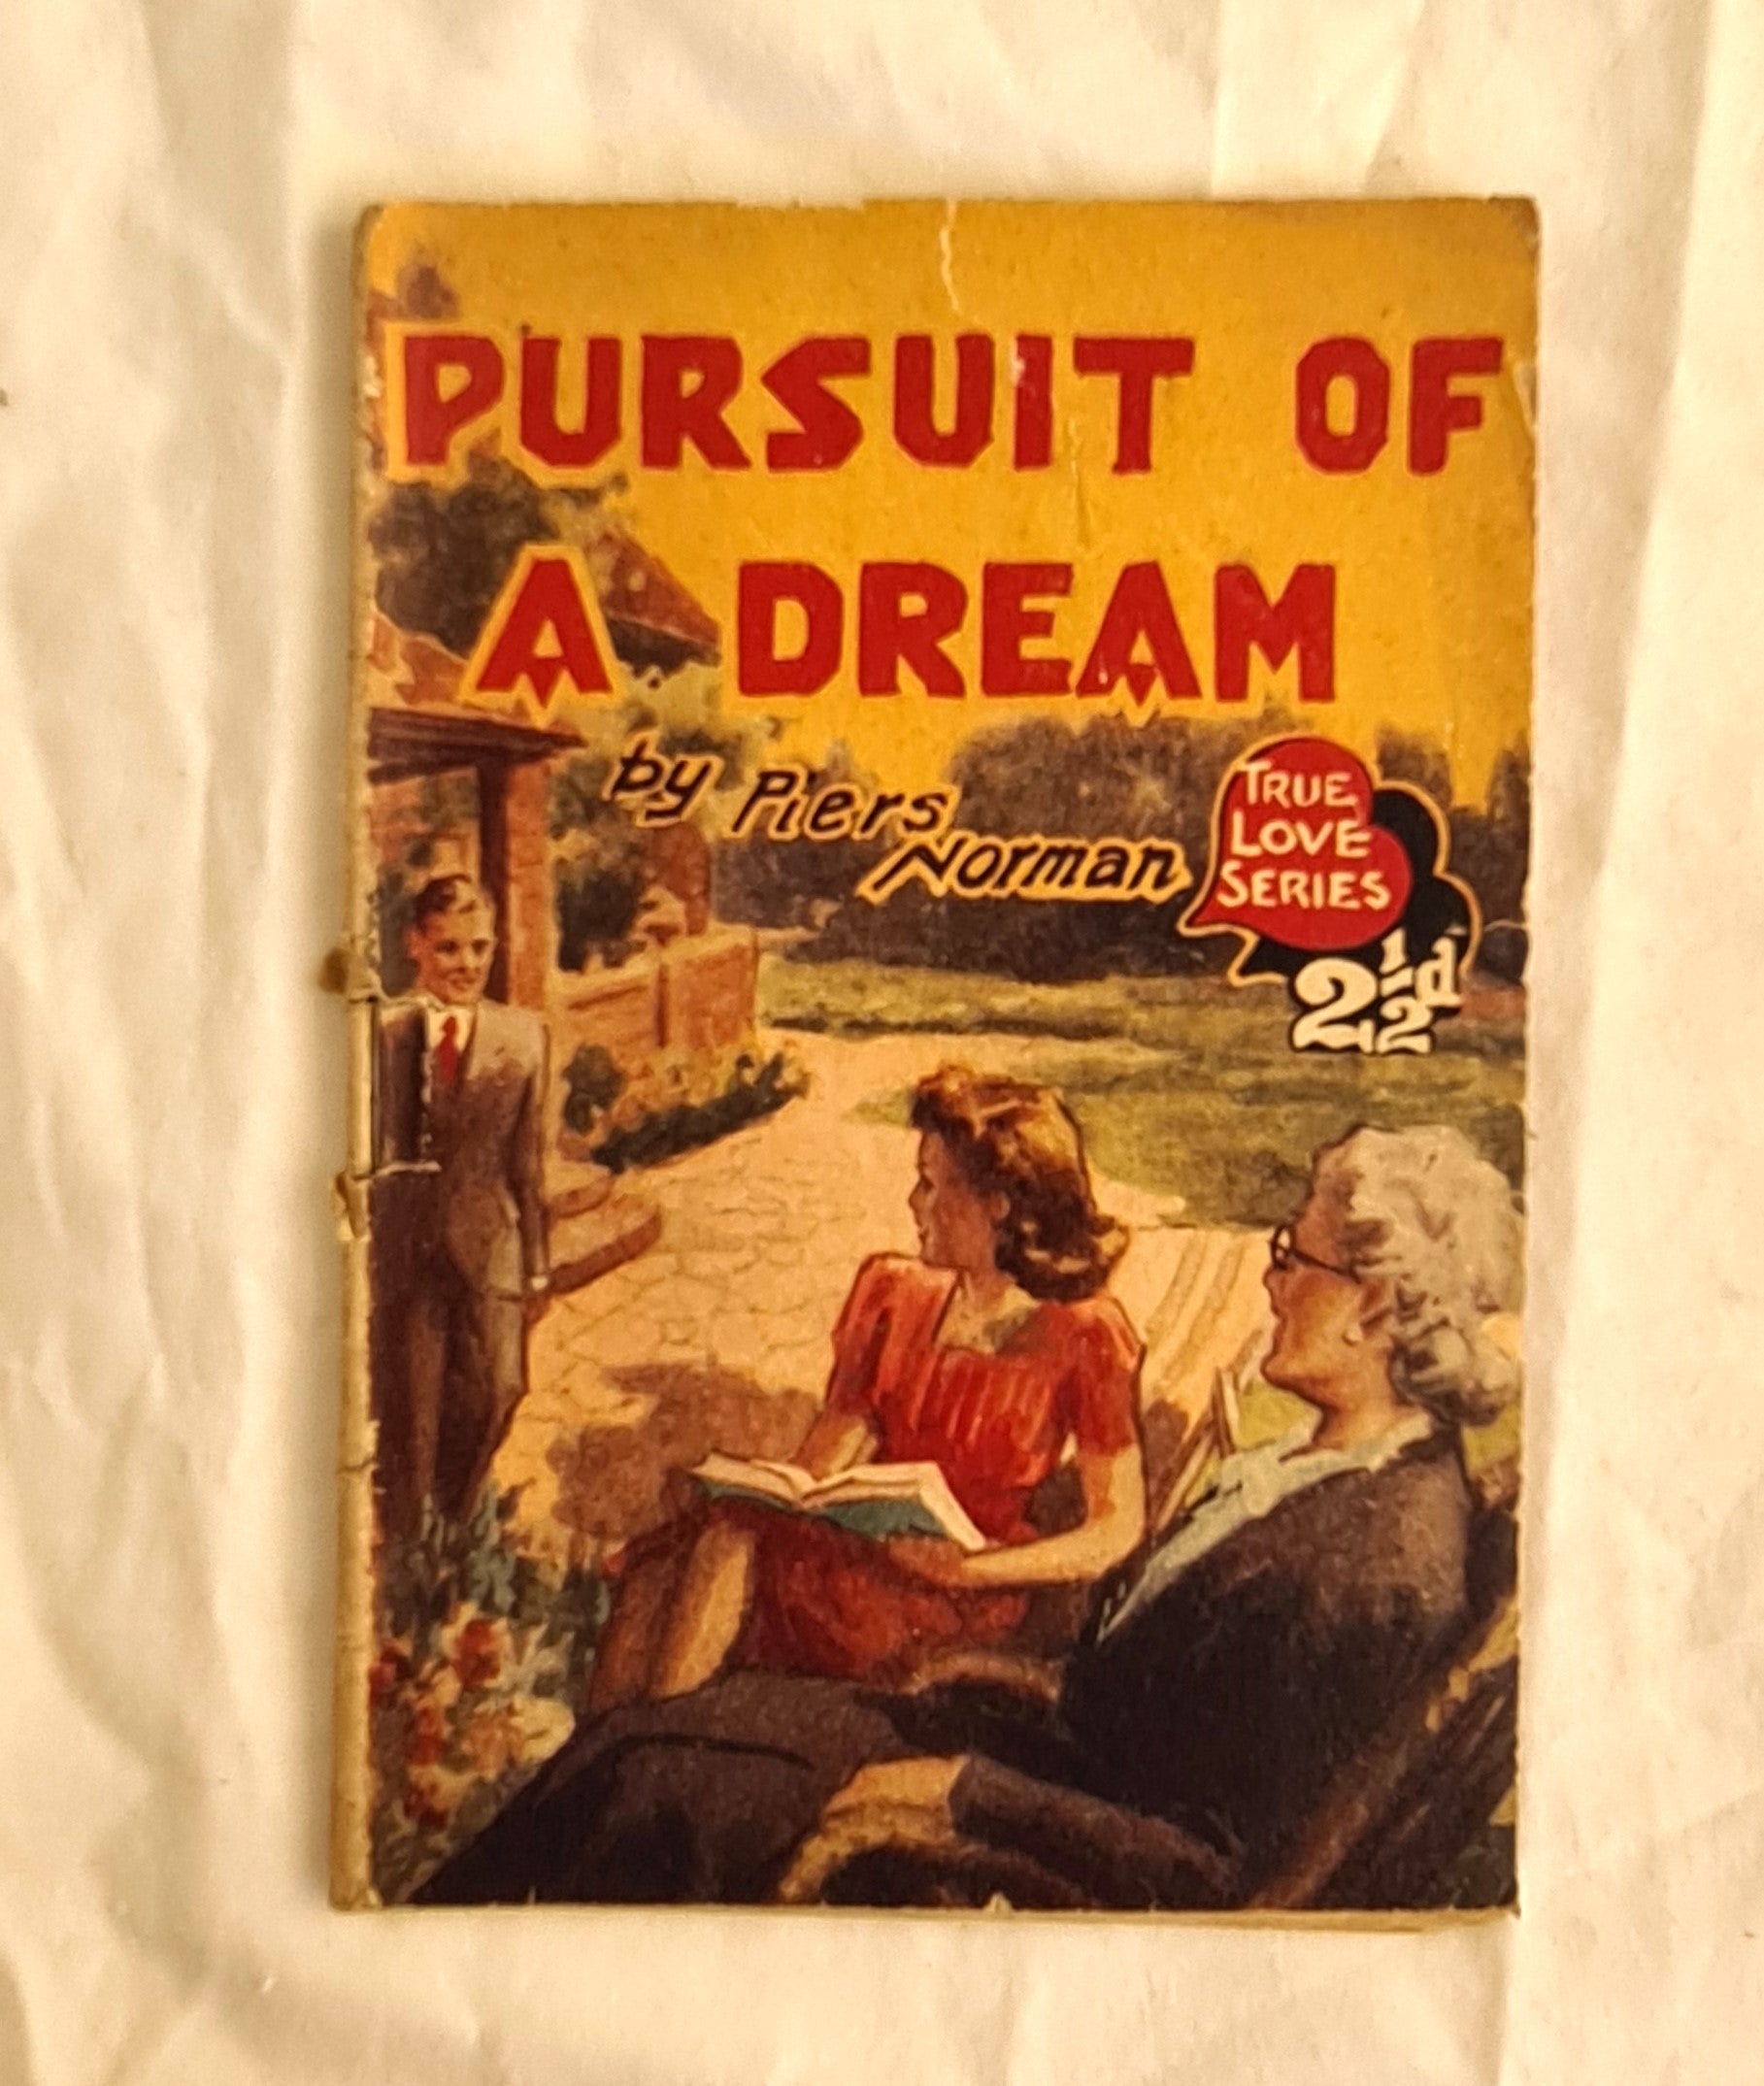 Pursuit of a Dream  by Piers Norman  True Love Series